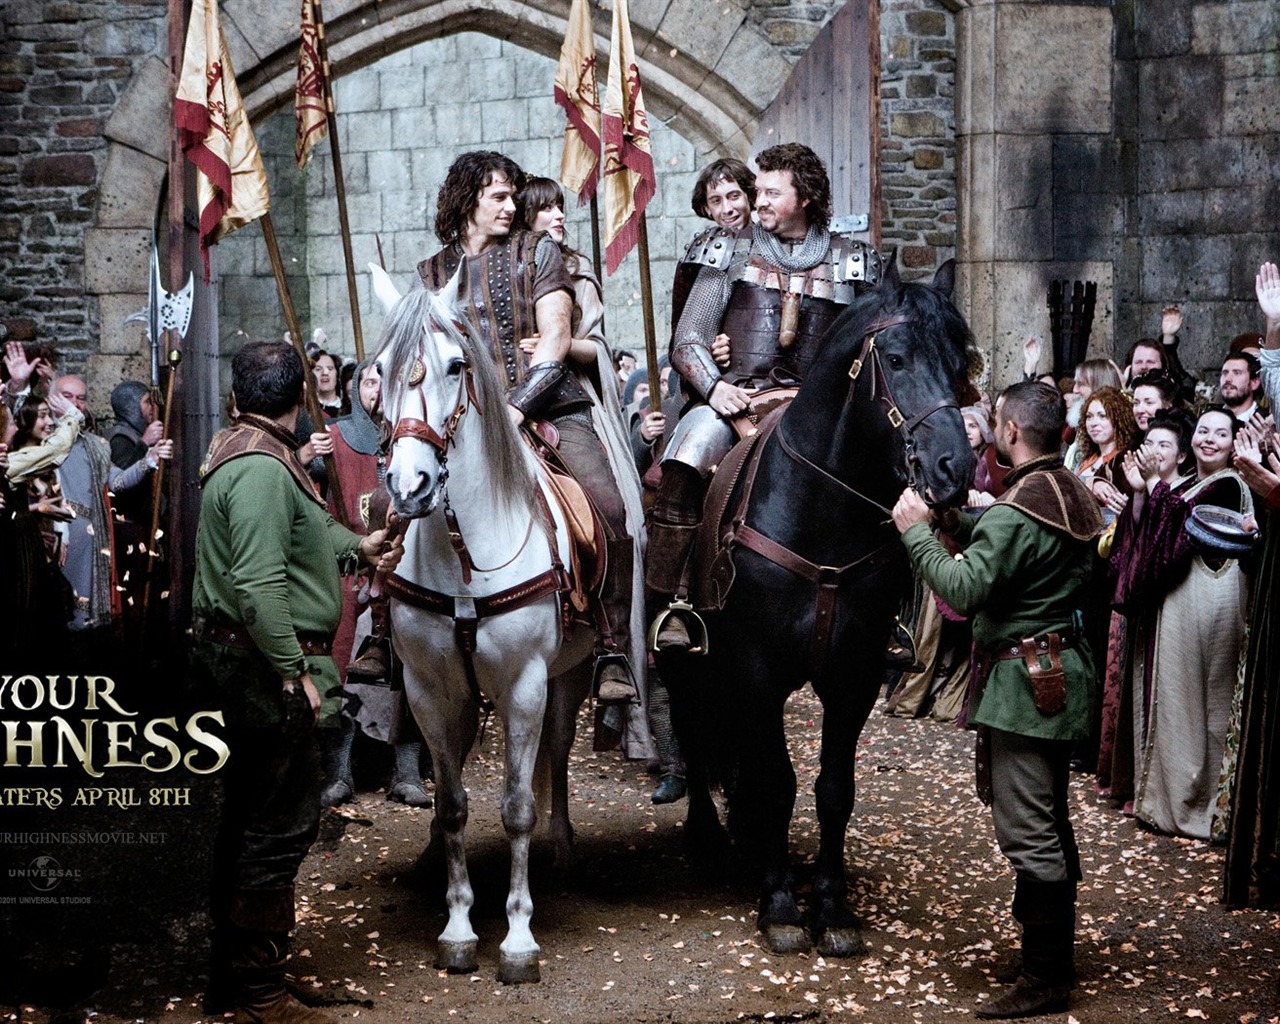 Your Highness wallpapers #9 - 1280x1024